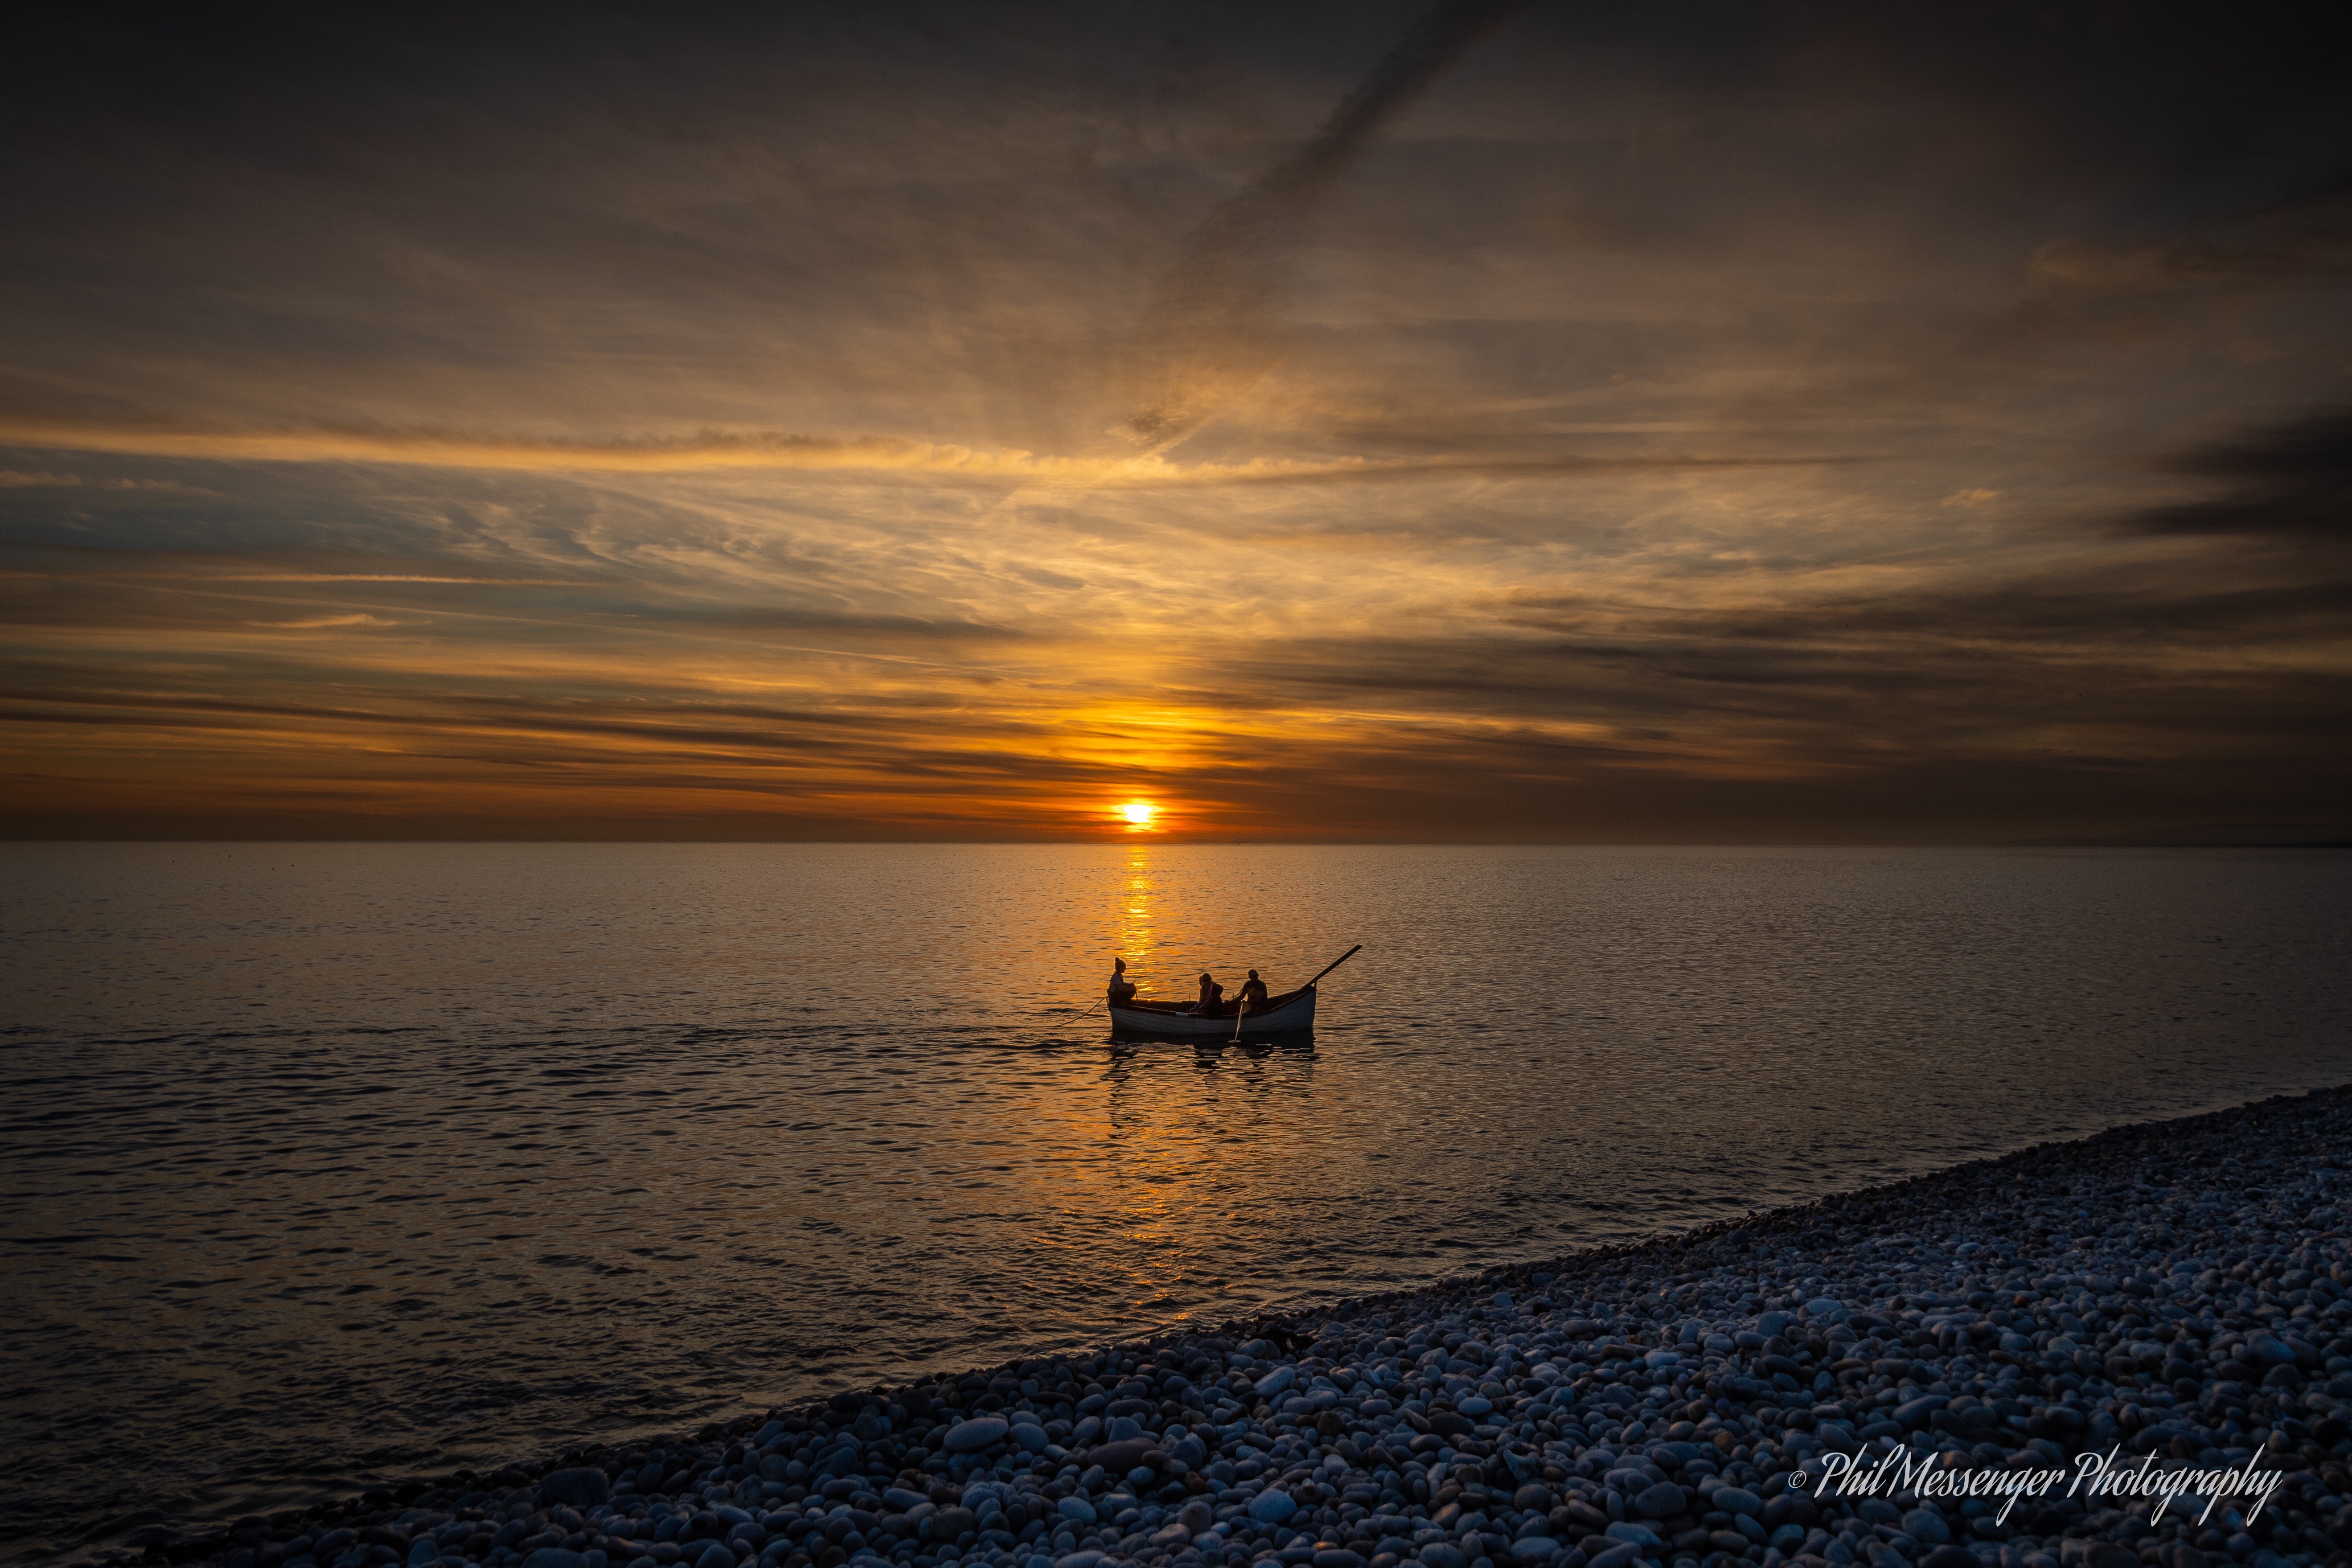 A small fishing boat heading out at sunset on Chesil Beach Portland.